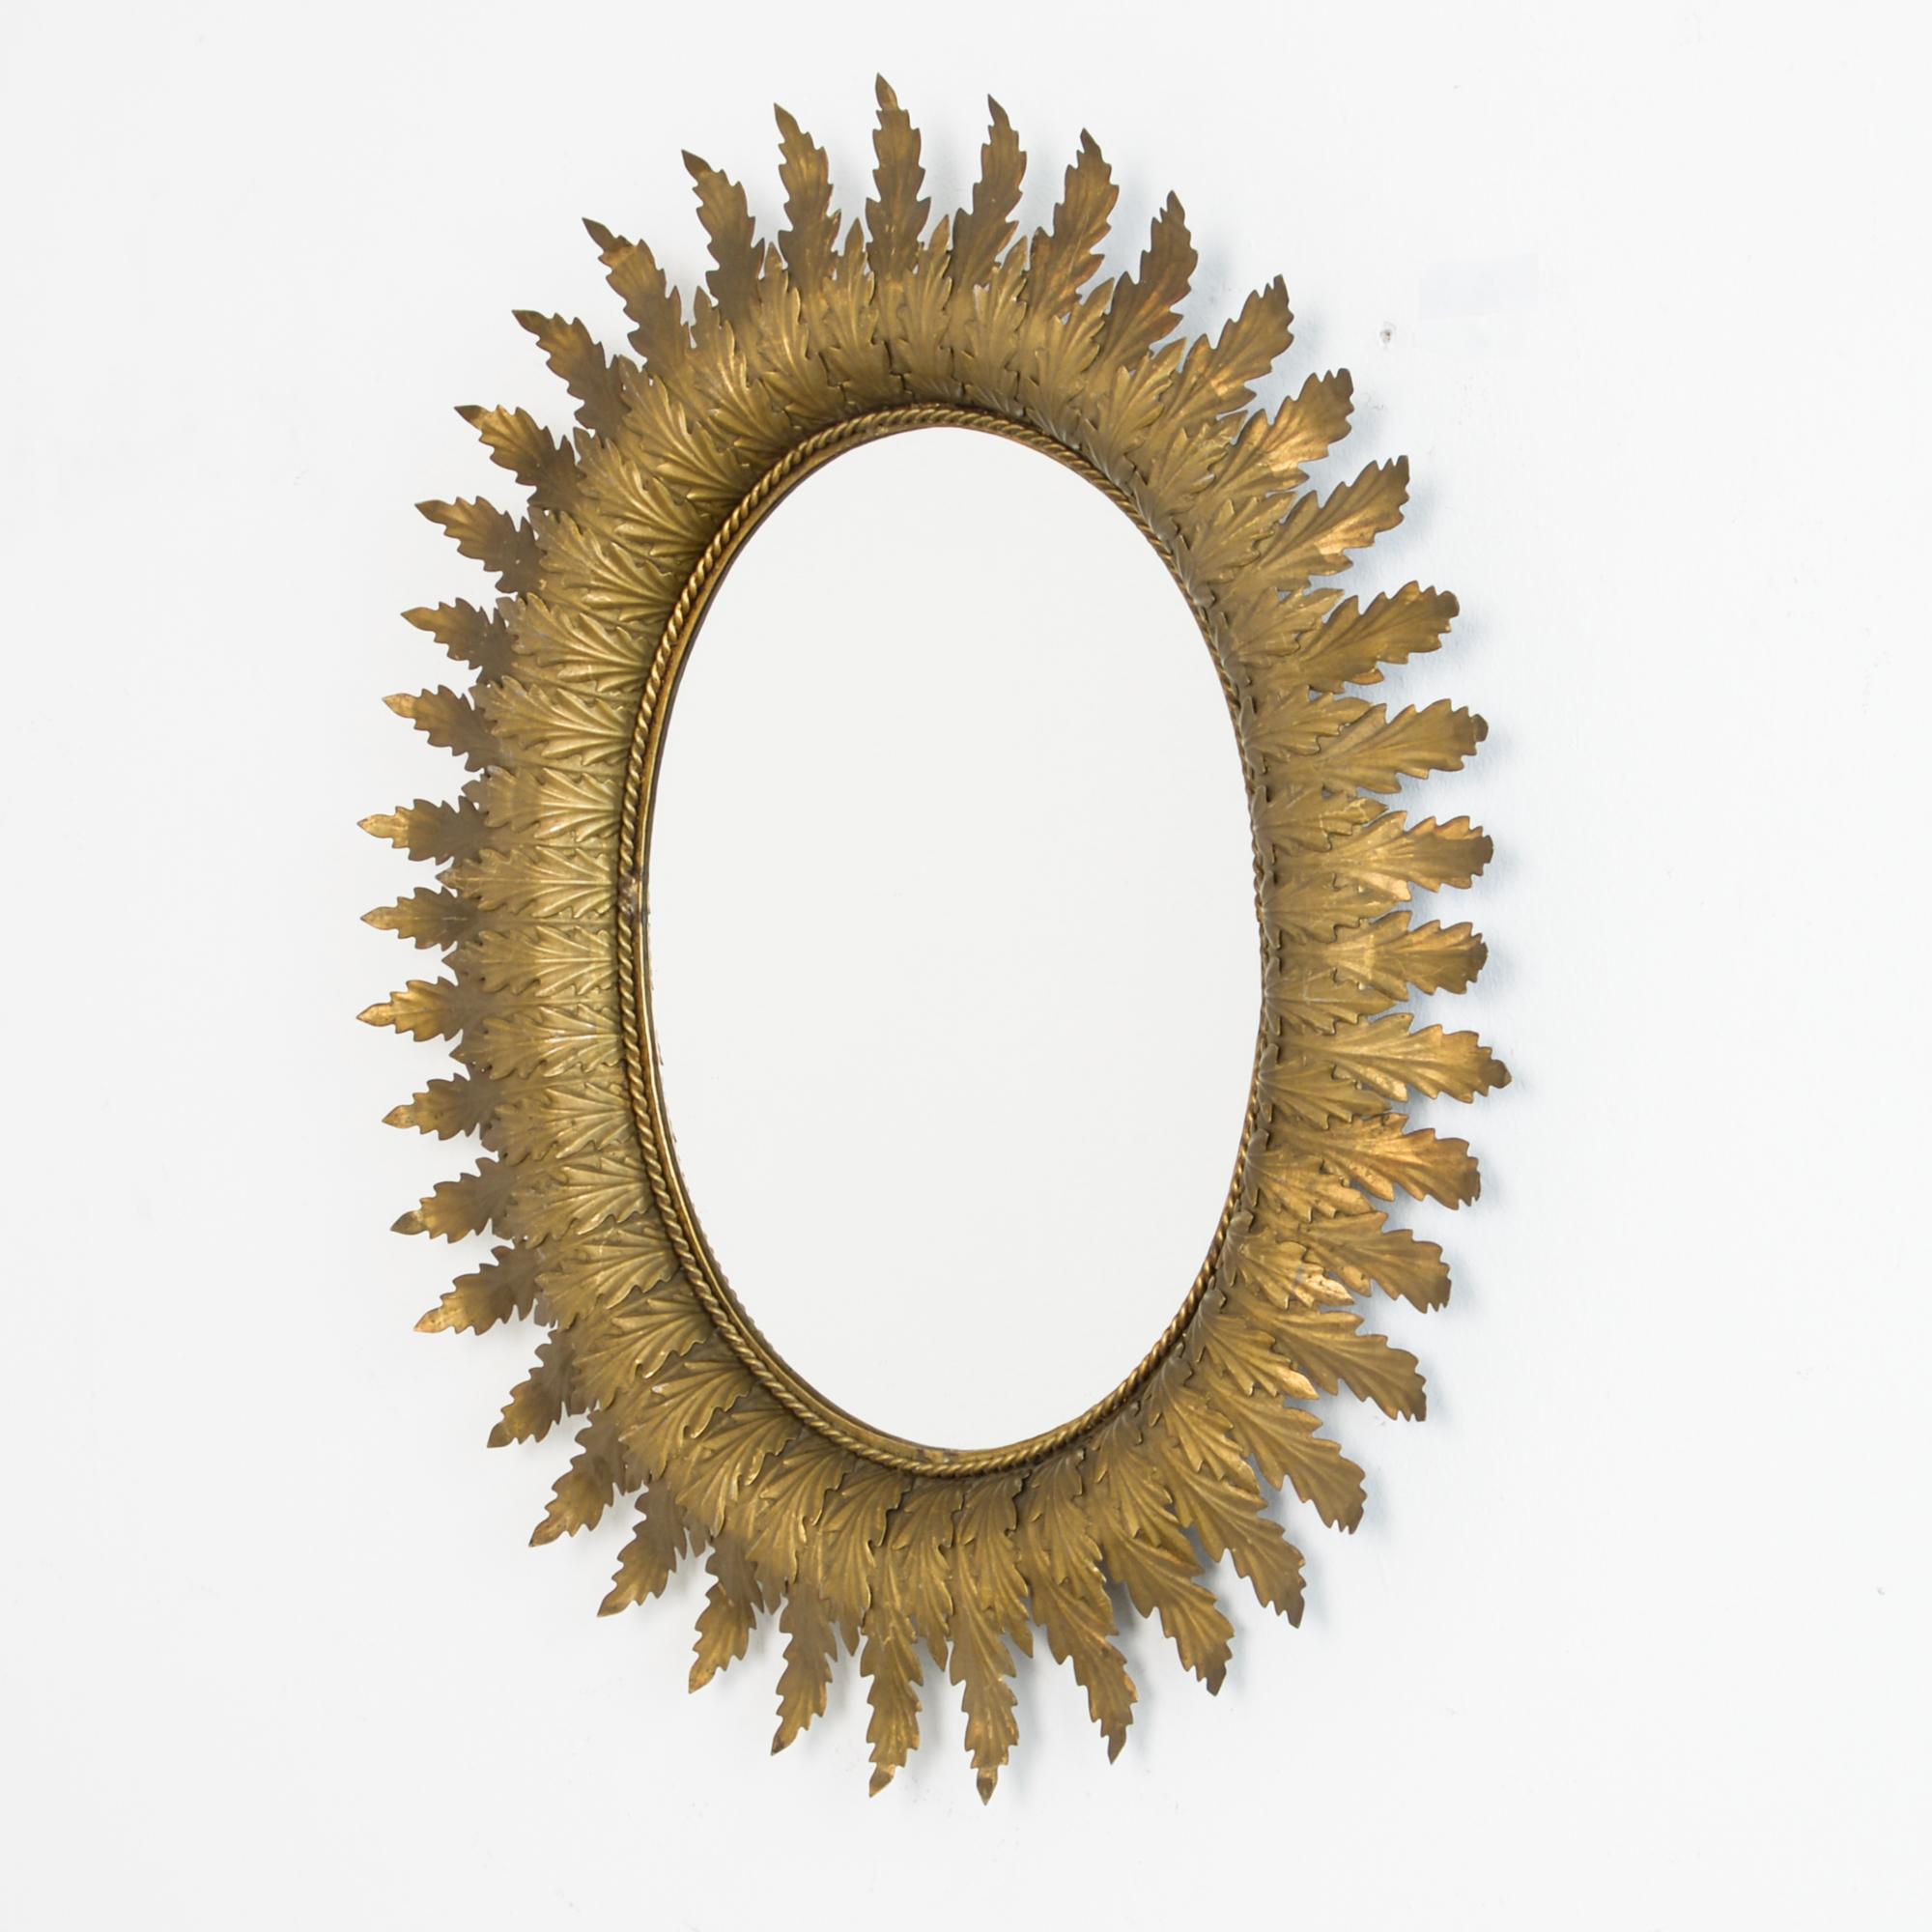 From Spain, circa 1960, an oval mirror framed by beaten metal leaves, painted with gold paint. A typical 1960s Spanish style plays on repetition, Baroque ornament, folk technique, and midcentury geometry. Chic and Bohemian accent.
  